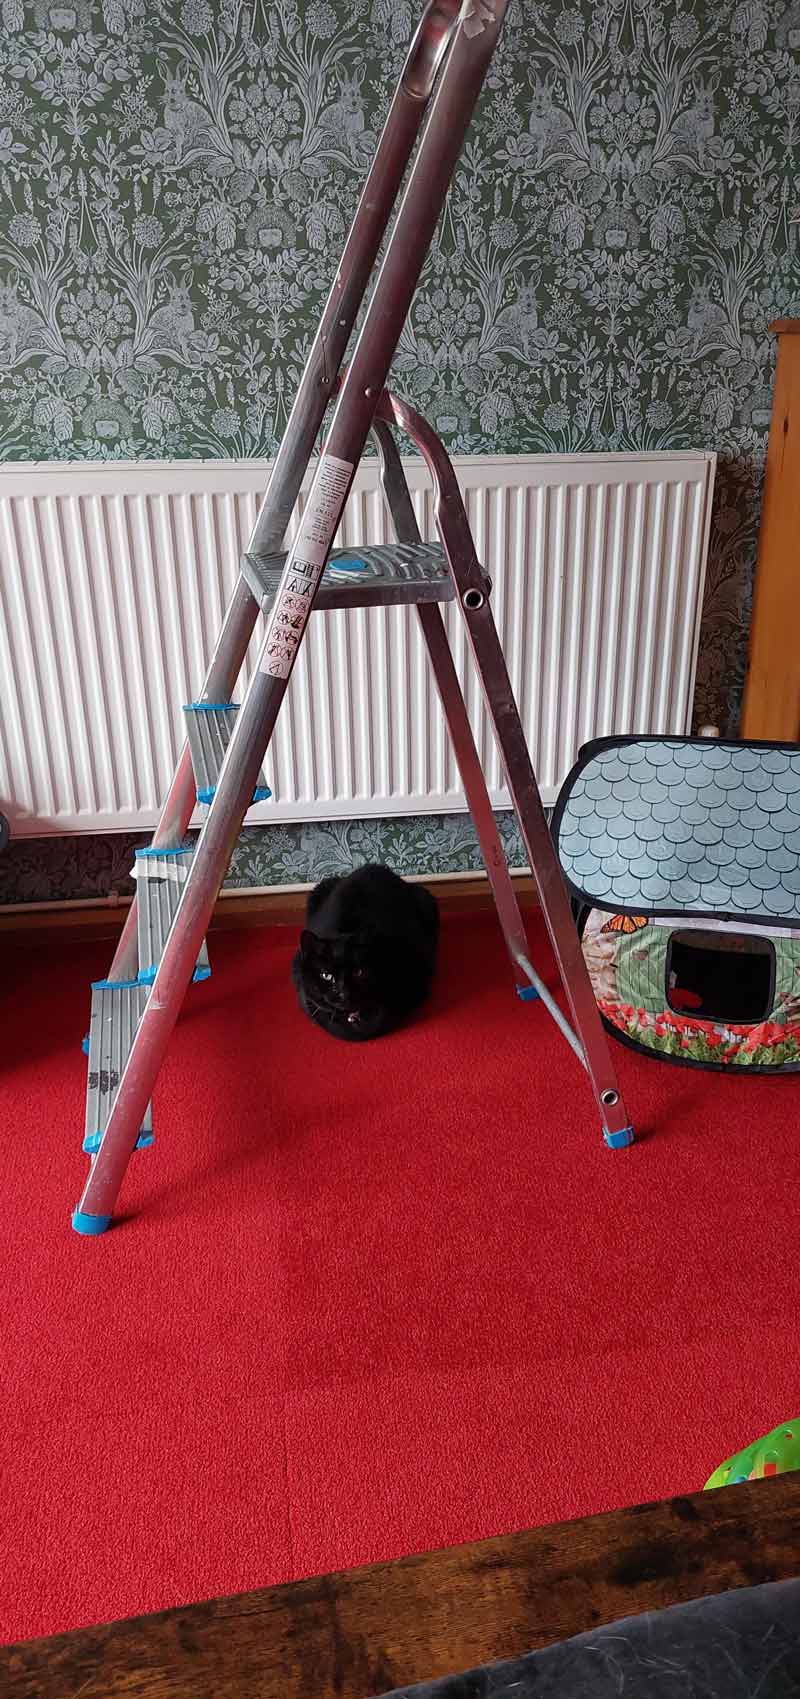 Our black cat under a ladder. Are we doomed